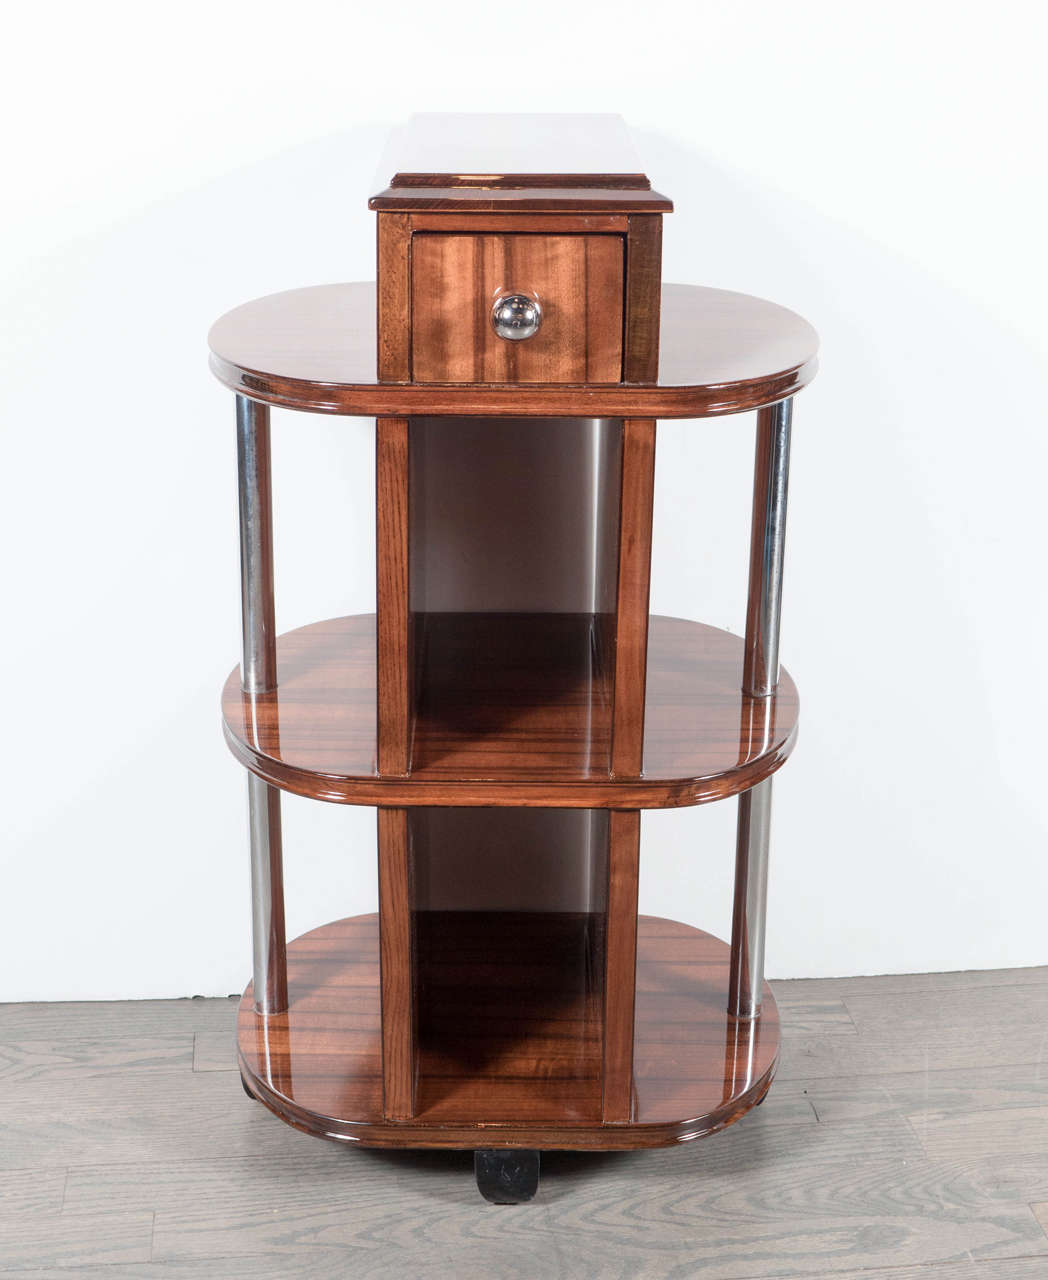 This versatile Art Deco Machine Age side table features a streamlined multi-tiered design in book-matched walnut, a drawer with a chrome pull and parallel chrome rods that run through the shelves. This is a great example of the Machine Ages